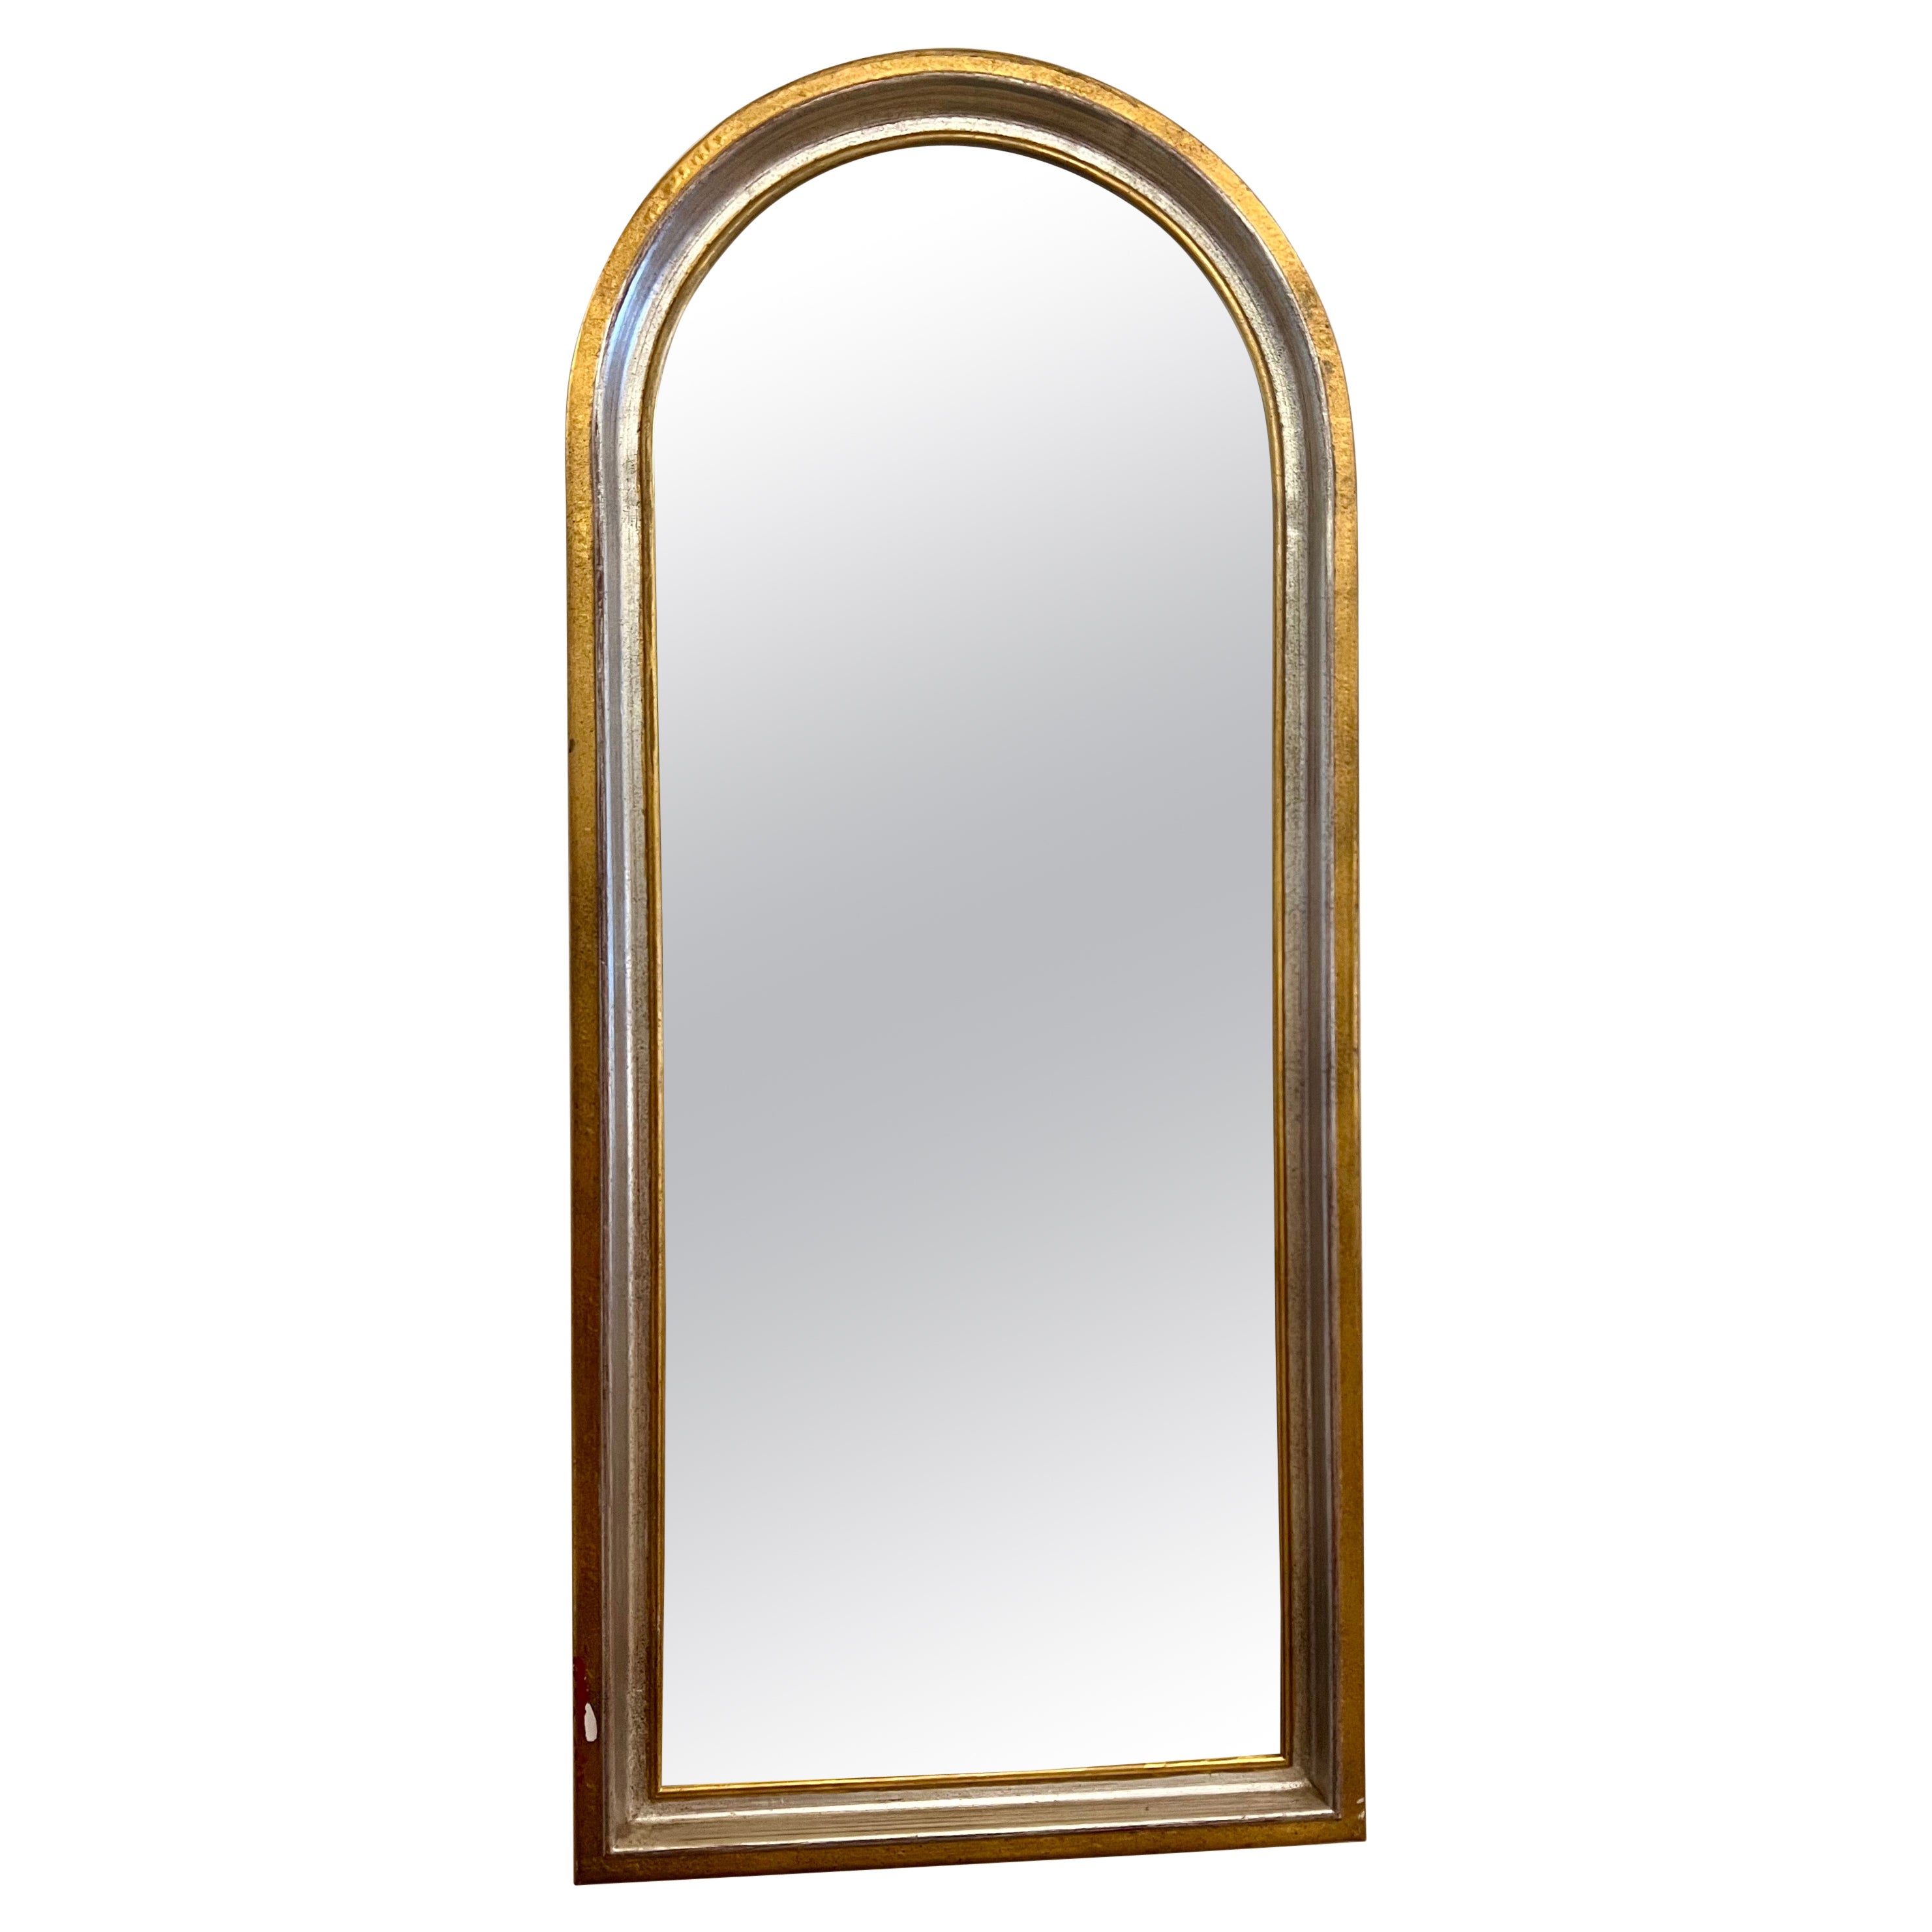 1960's Hollywood Regency Gold & Silver Leaf Giltwood Arched Italian Mirror For Sale